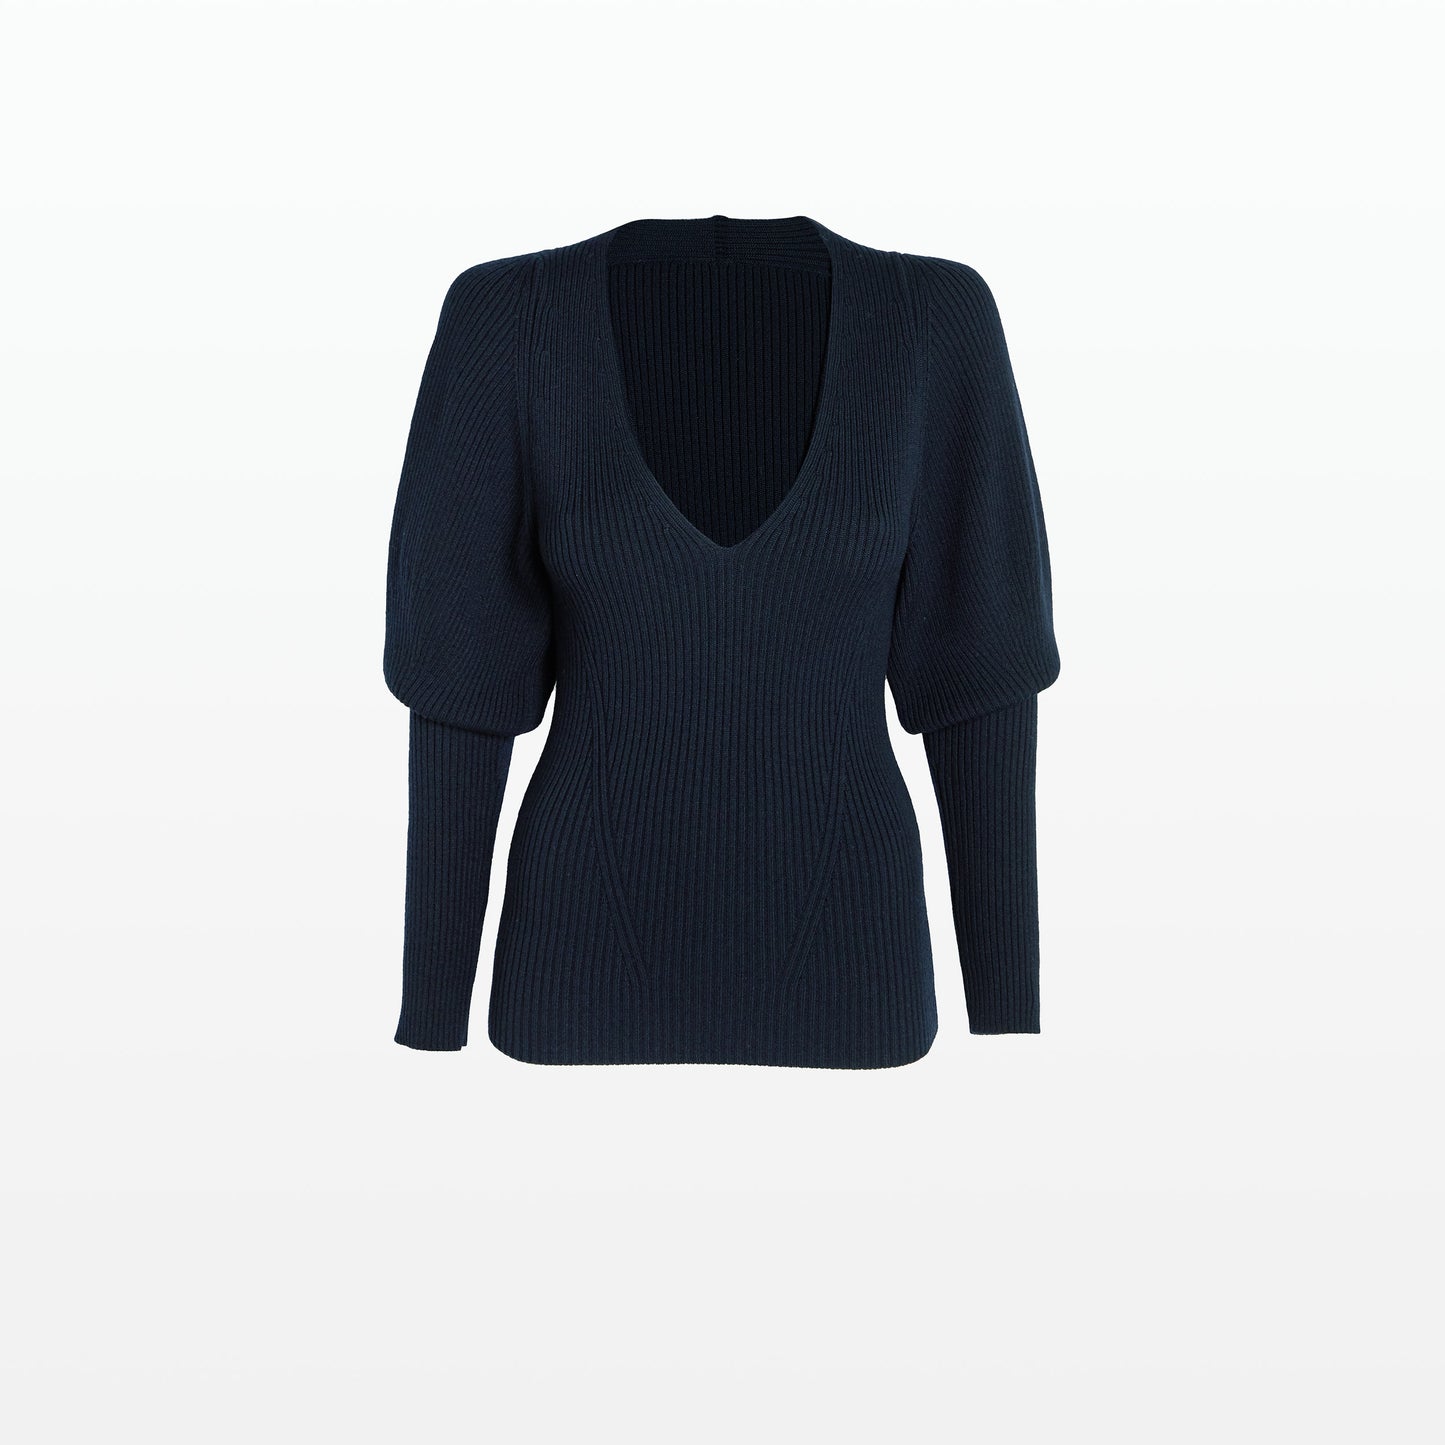 Laure Navy Knit